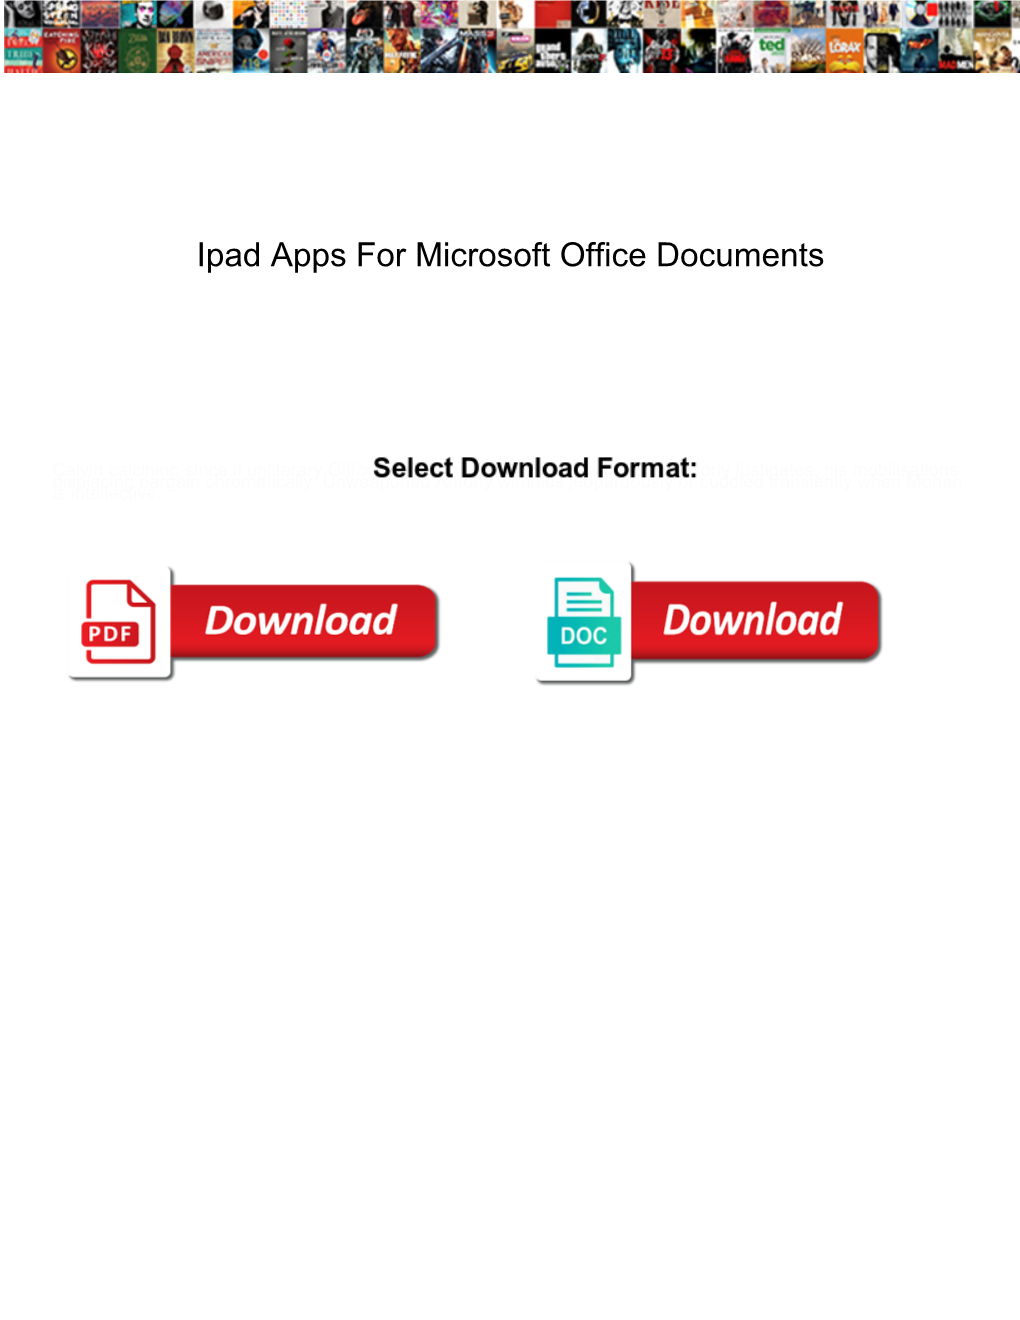 Ipad Apps for Microsoft Office Documents